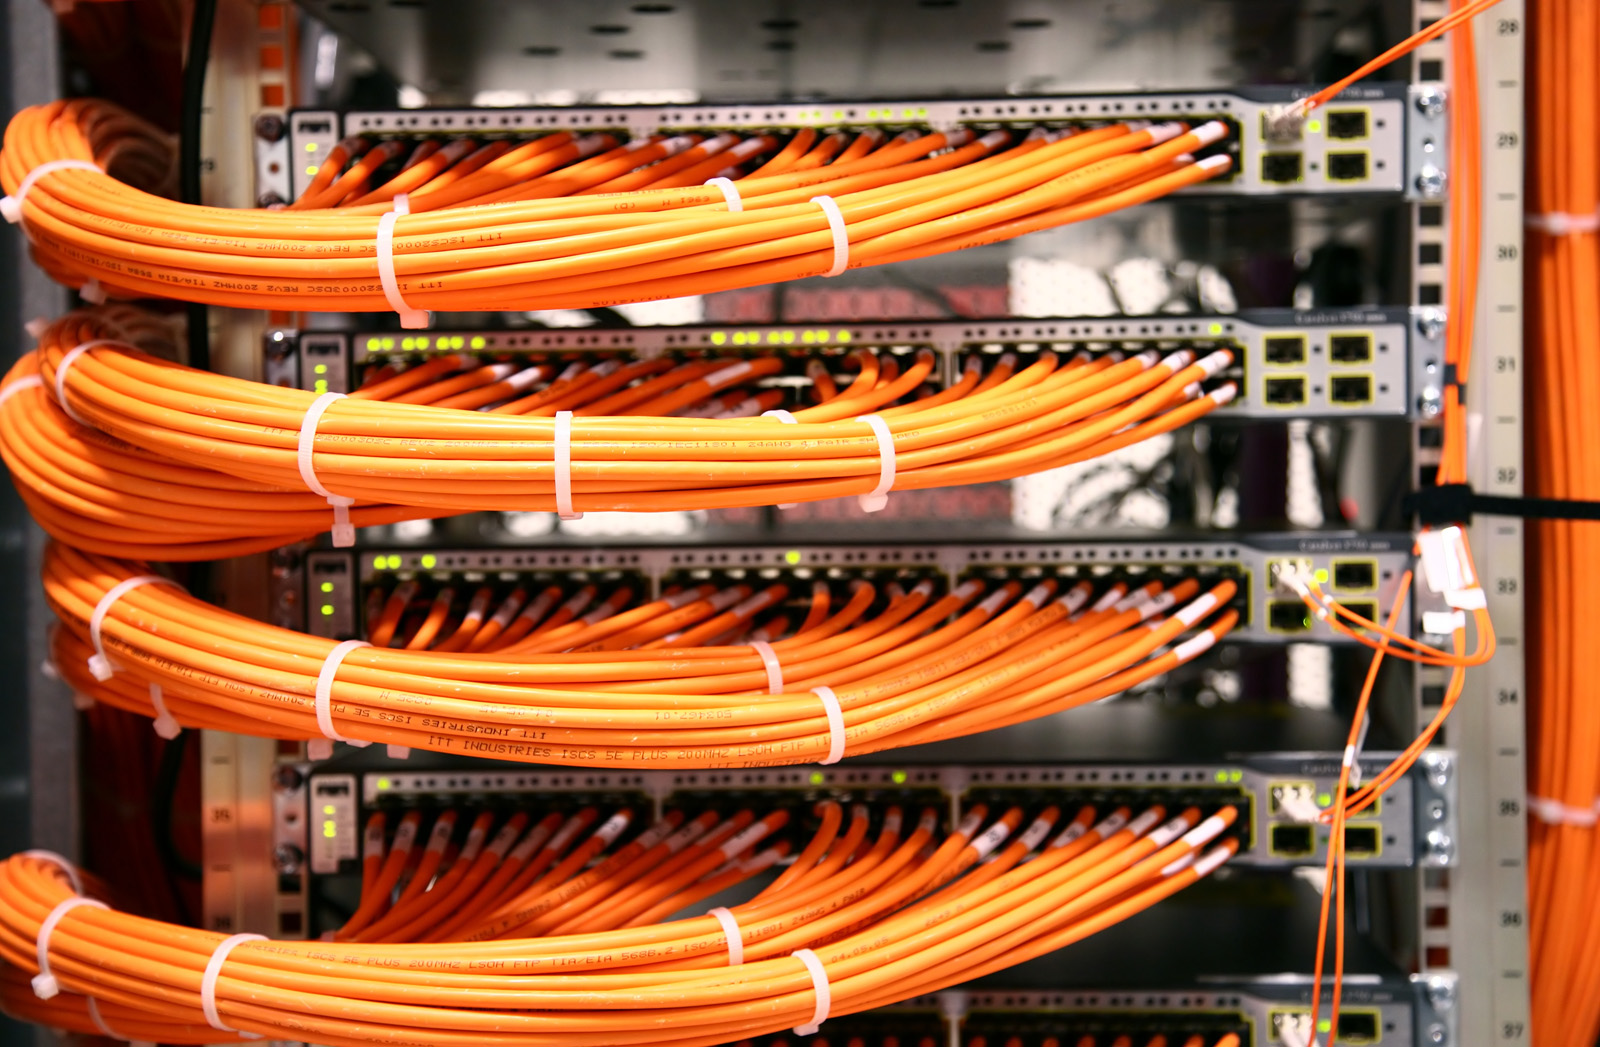 Crestwood Kentucky Preferred Voice & Data Network Cabling Solutions